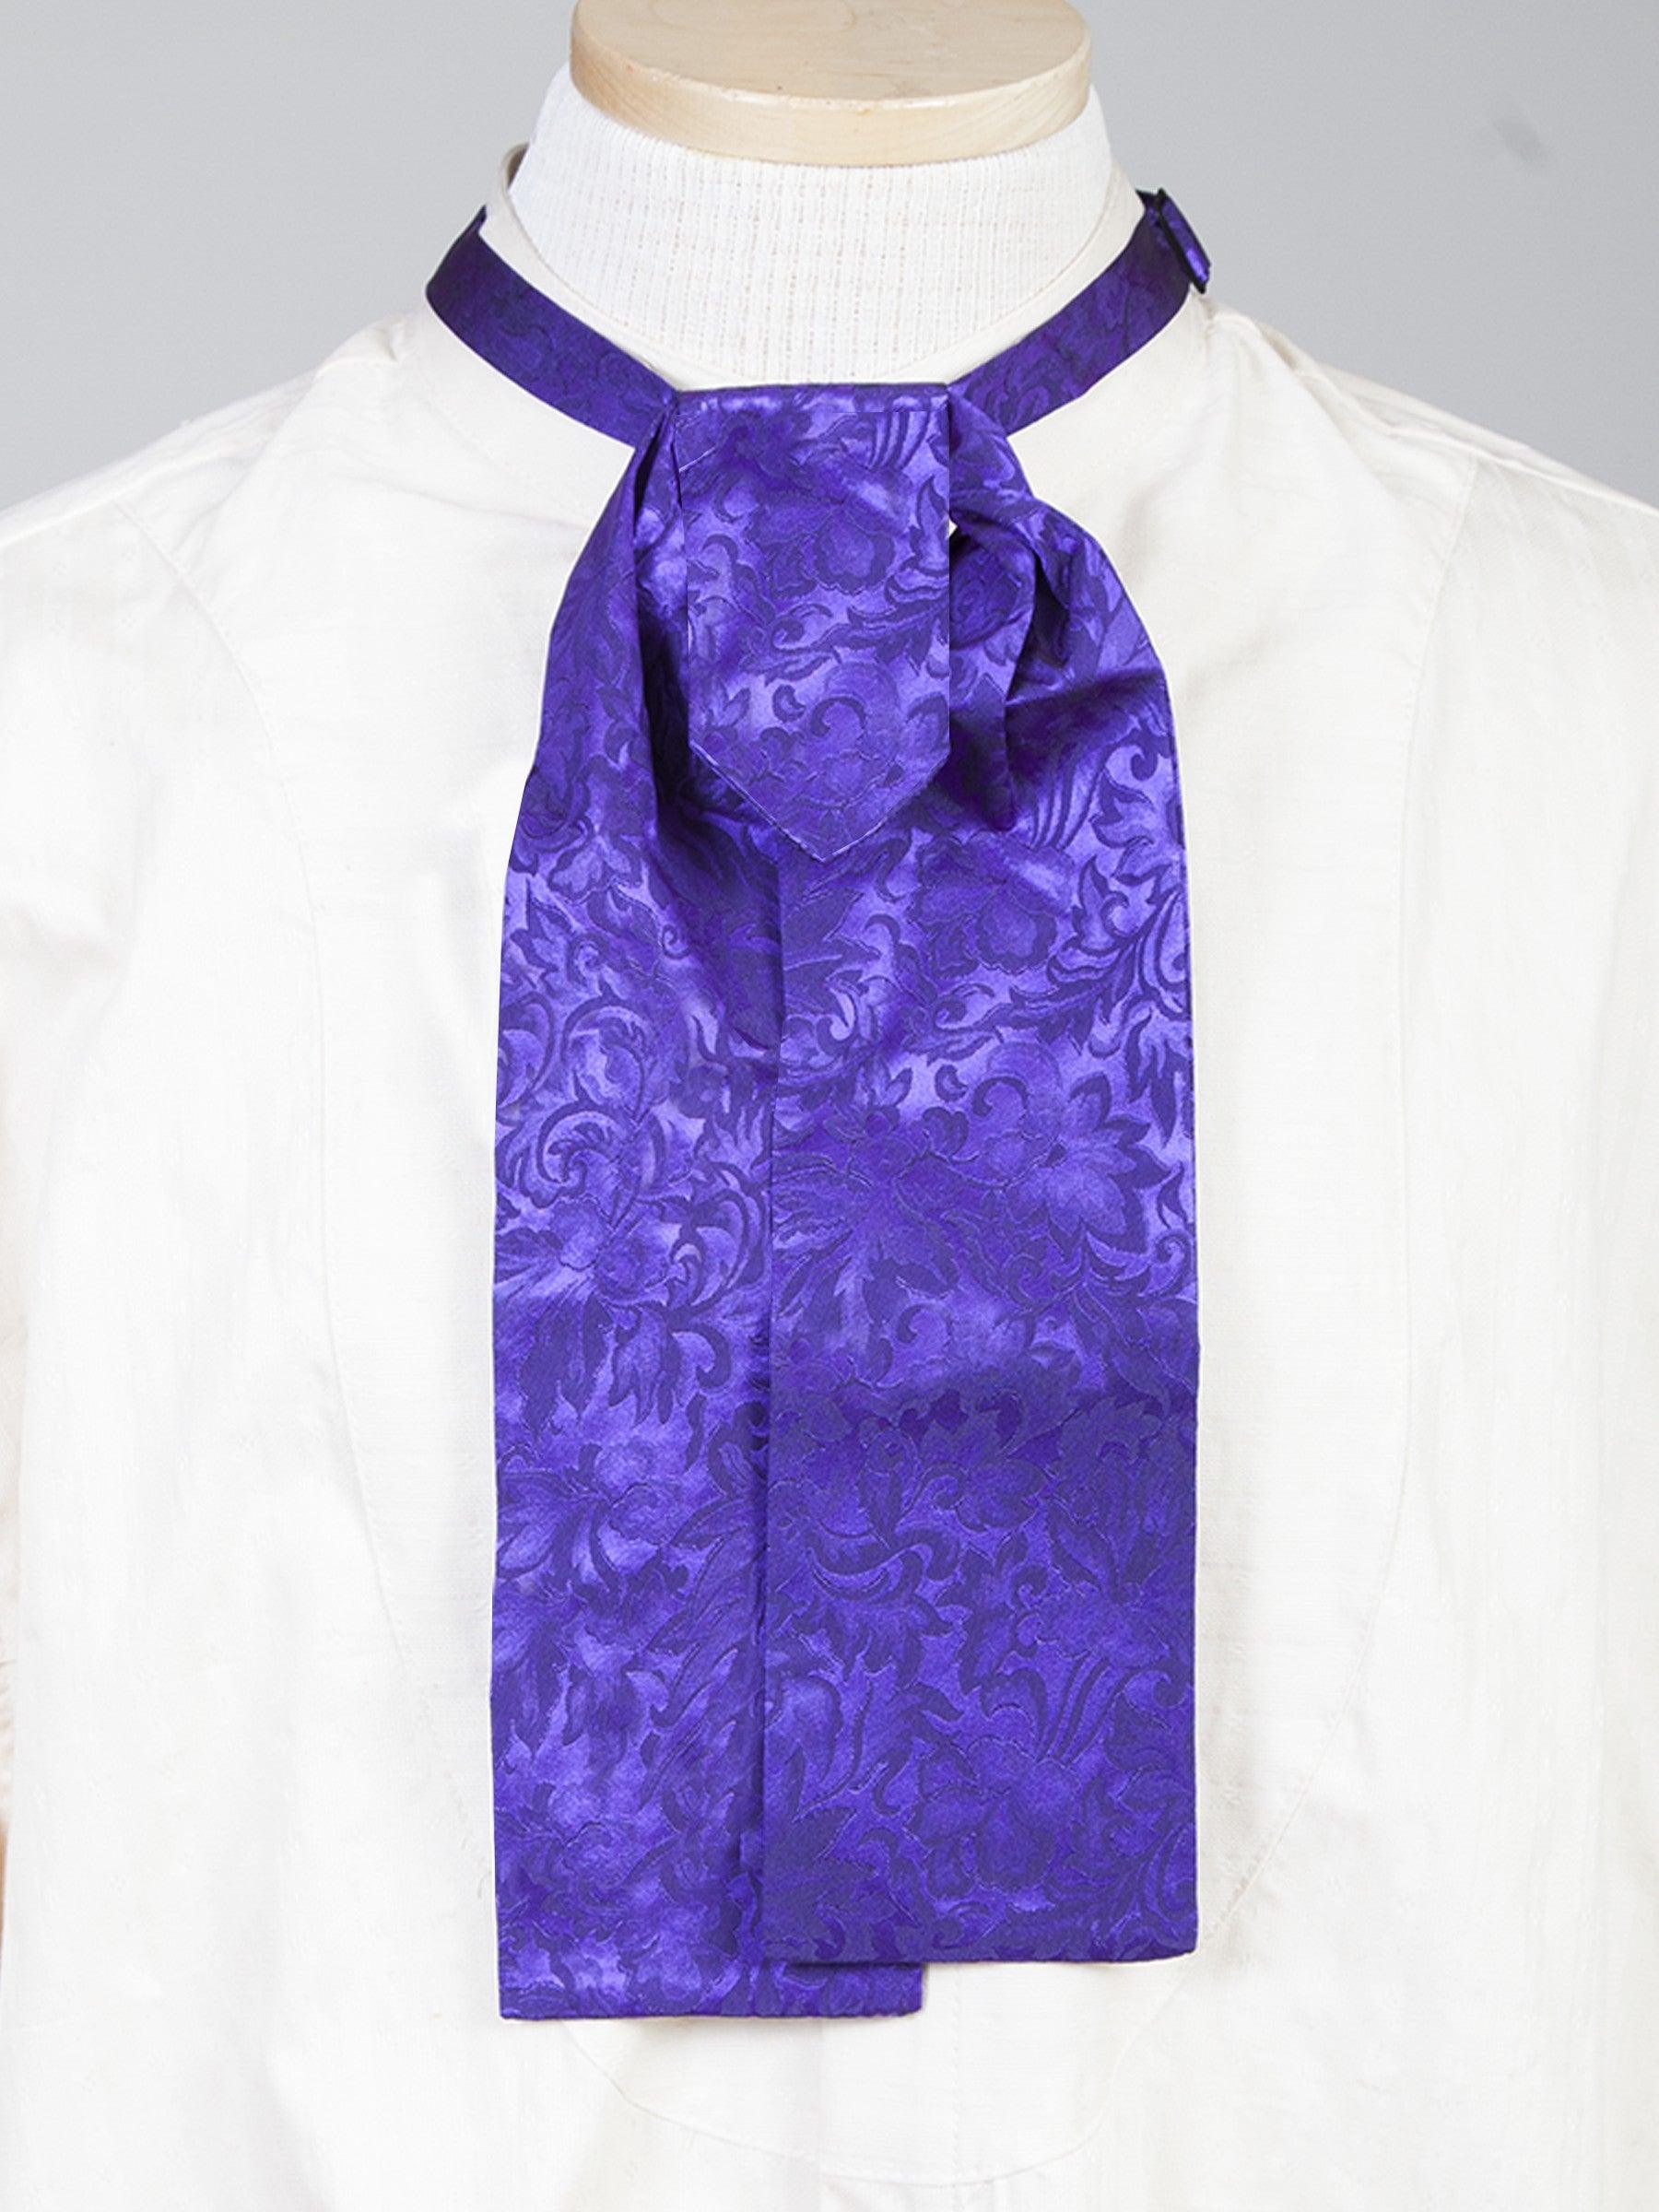 Scully Beautiful silk jacquard and an adjustable neck band - Flyclothing LLC